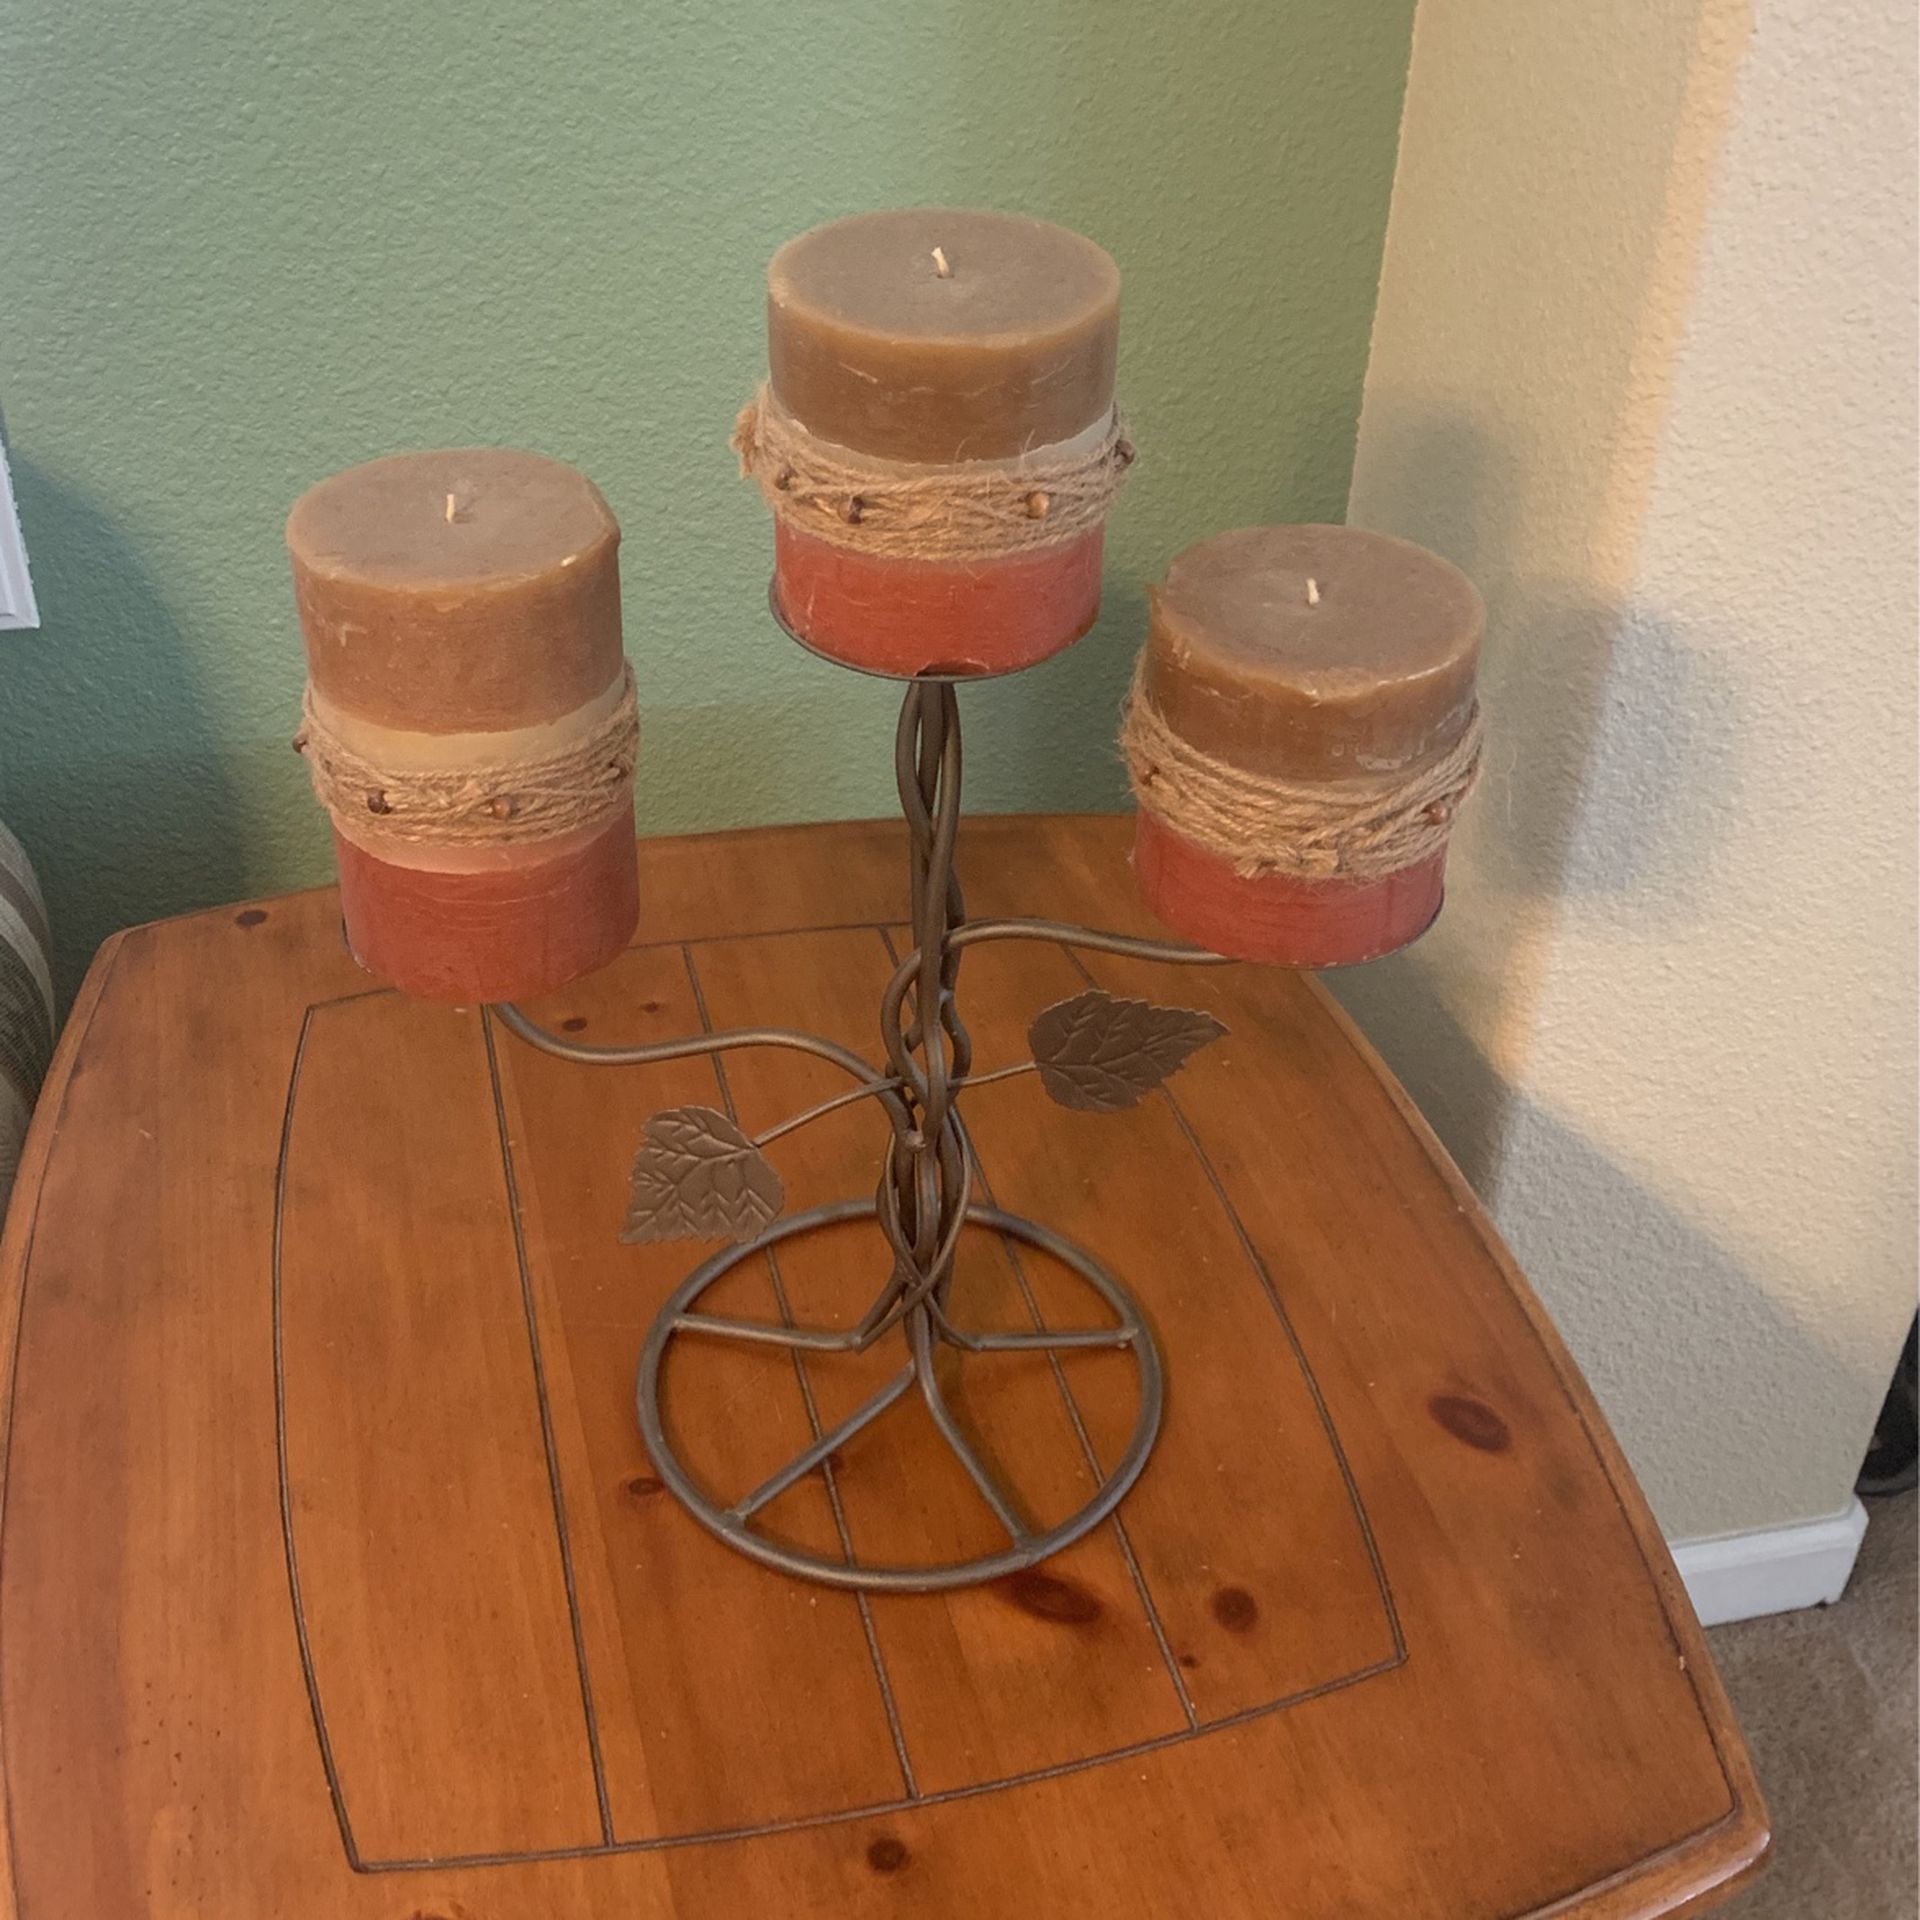 $15 - Candle holder With Candles